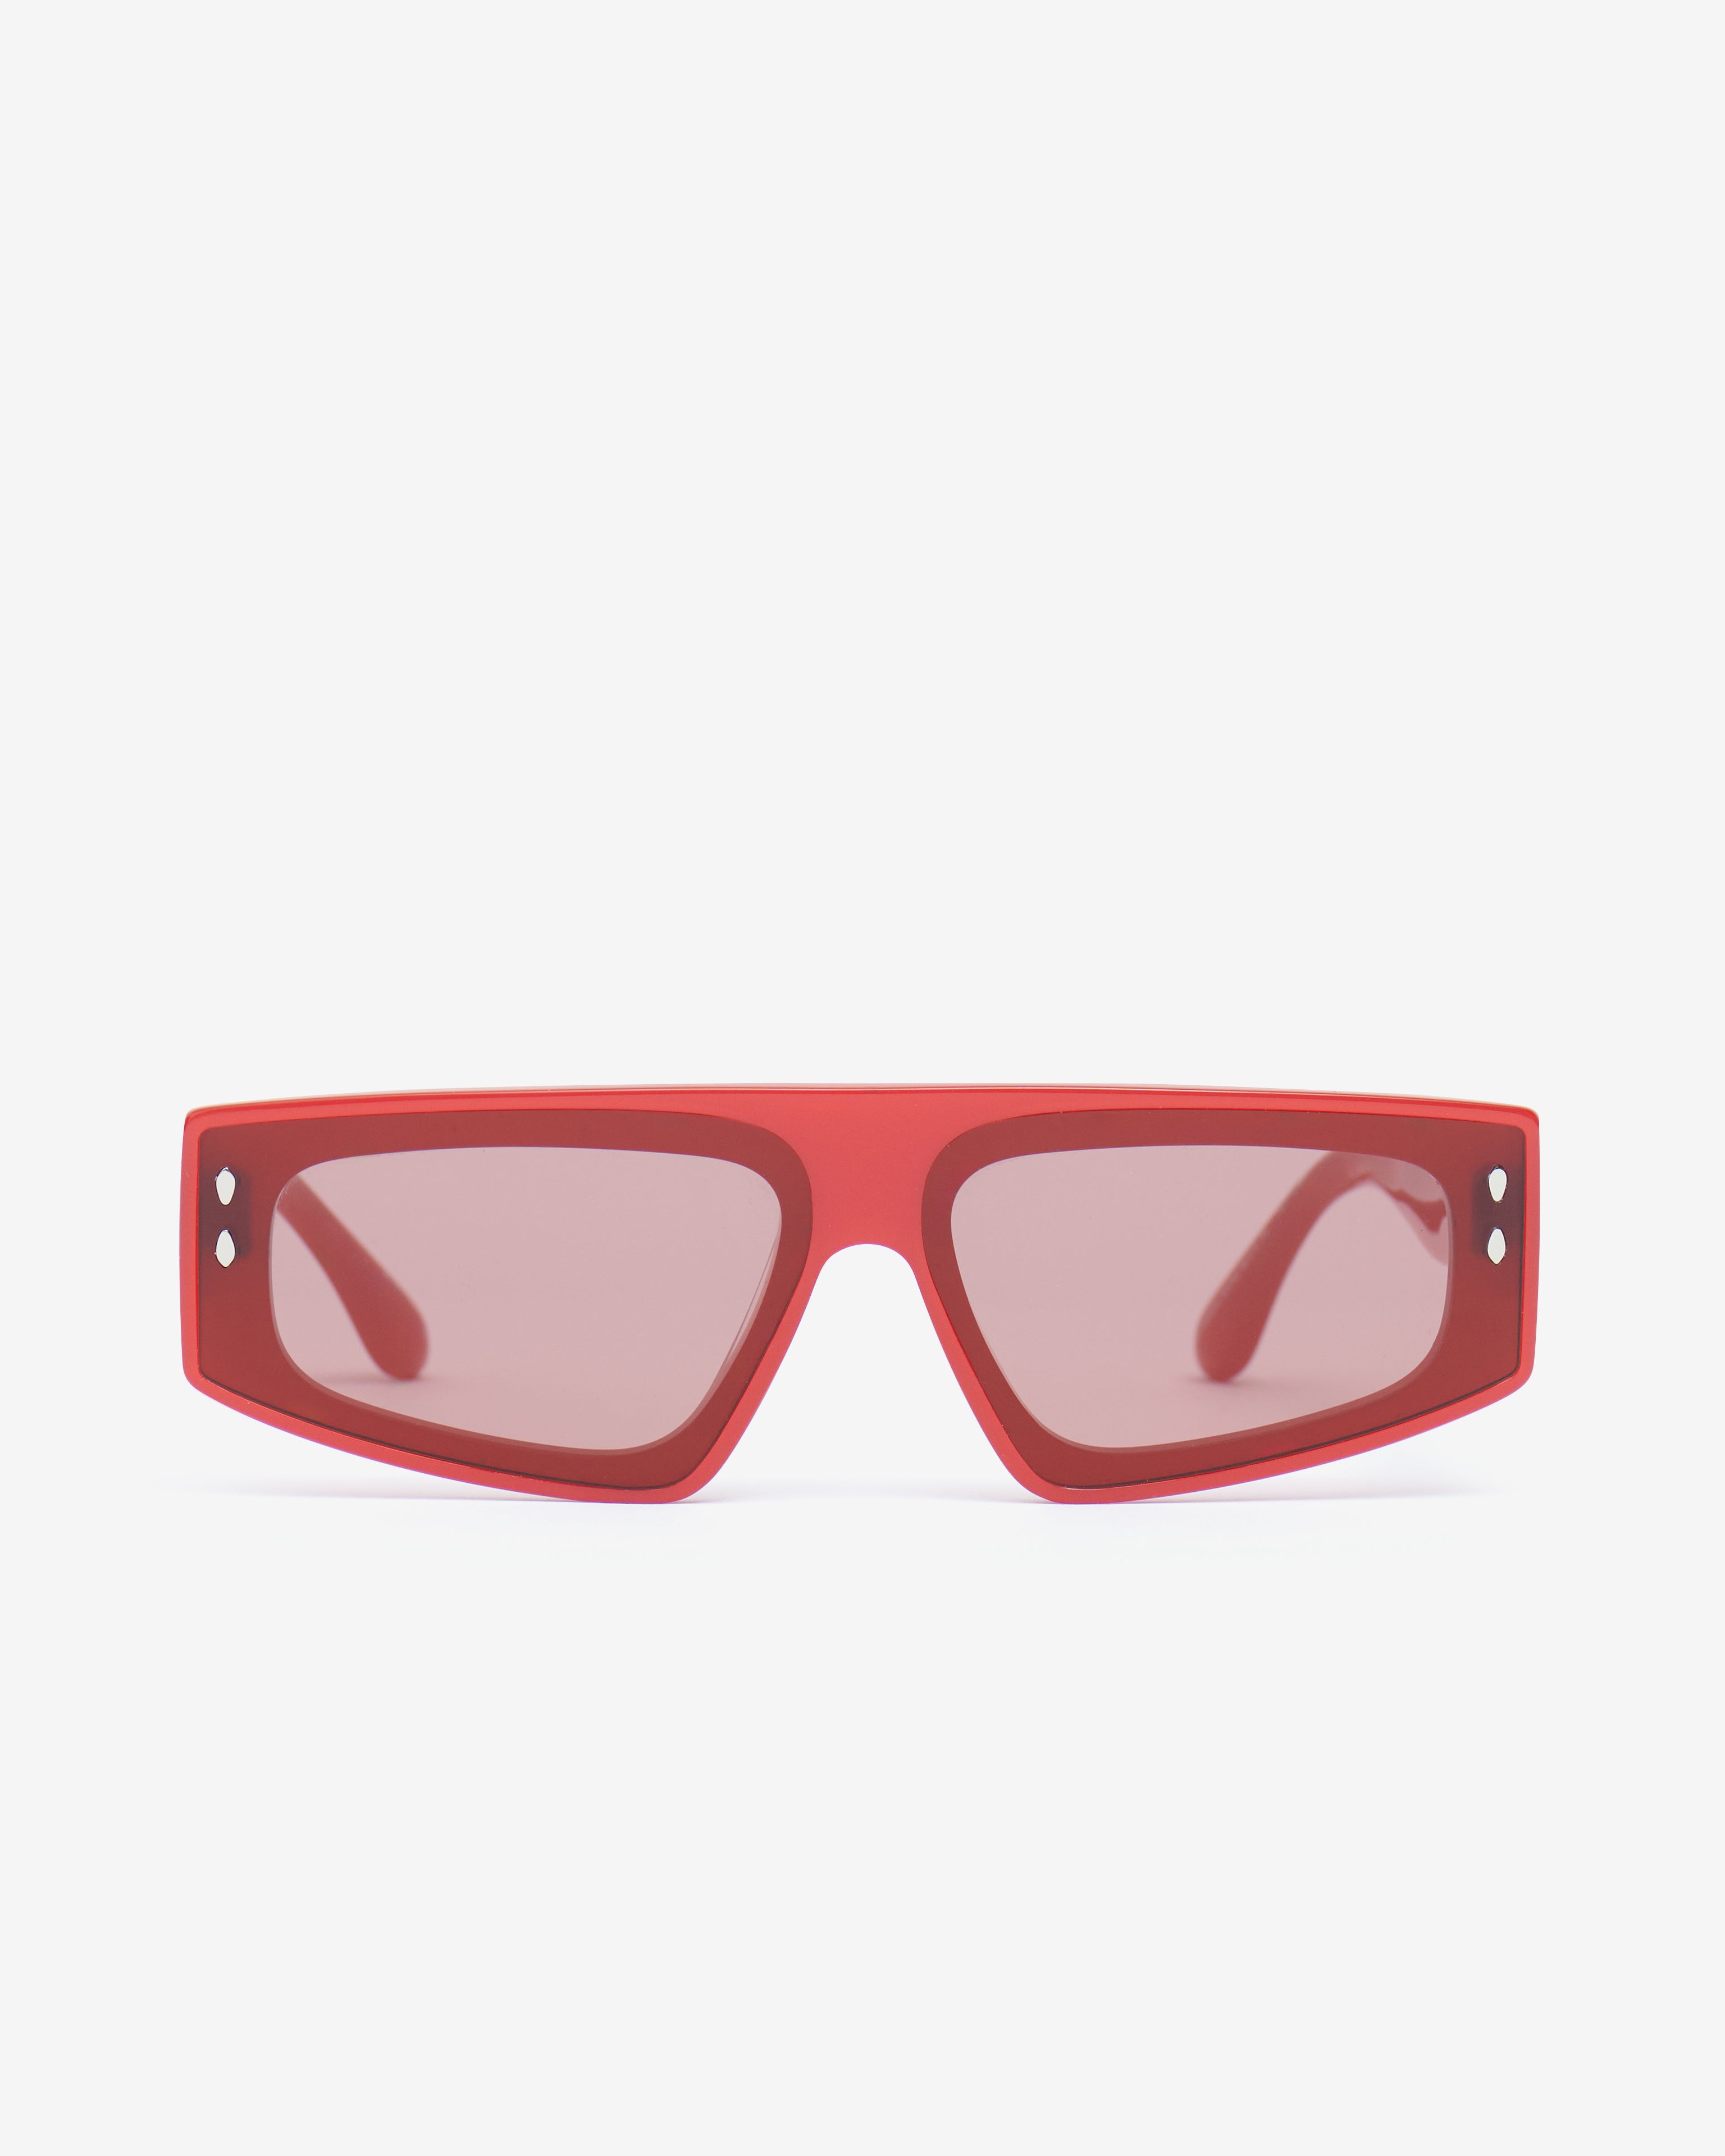 Sonnenbrille zoomy Woman Pearled red-burgundy 1